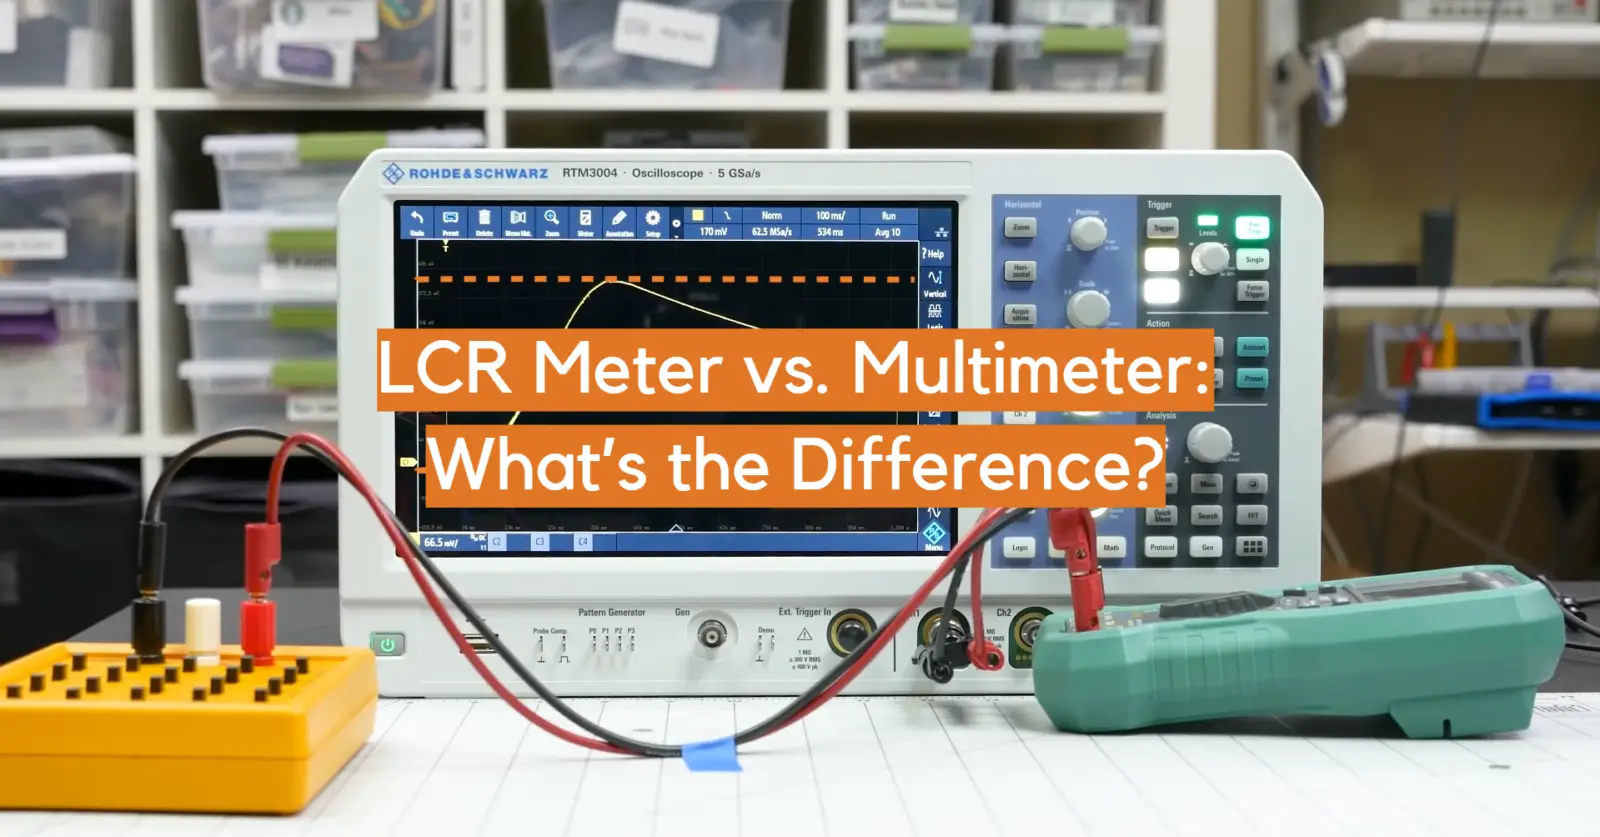 LCR Meter vs. Multimeter: What’s the Difference?